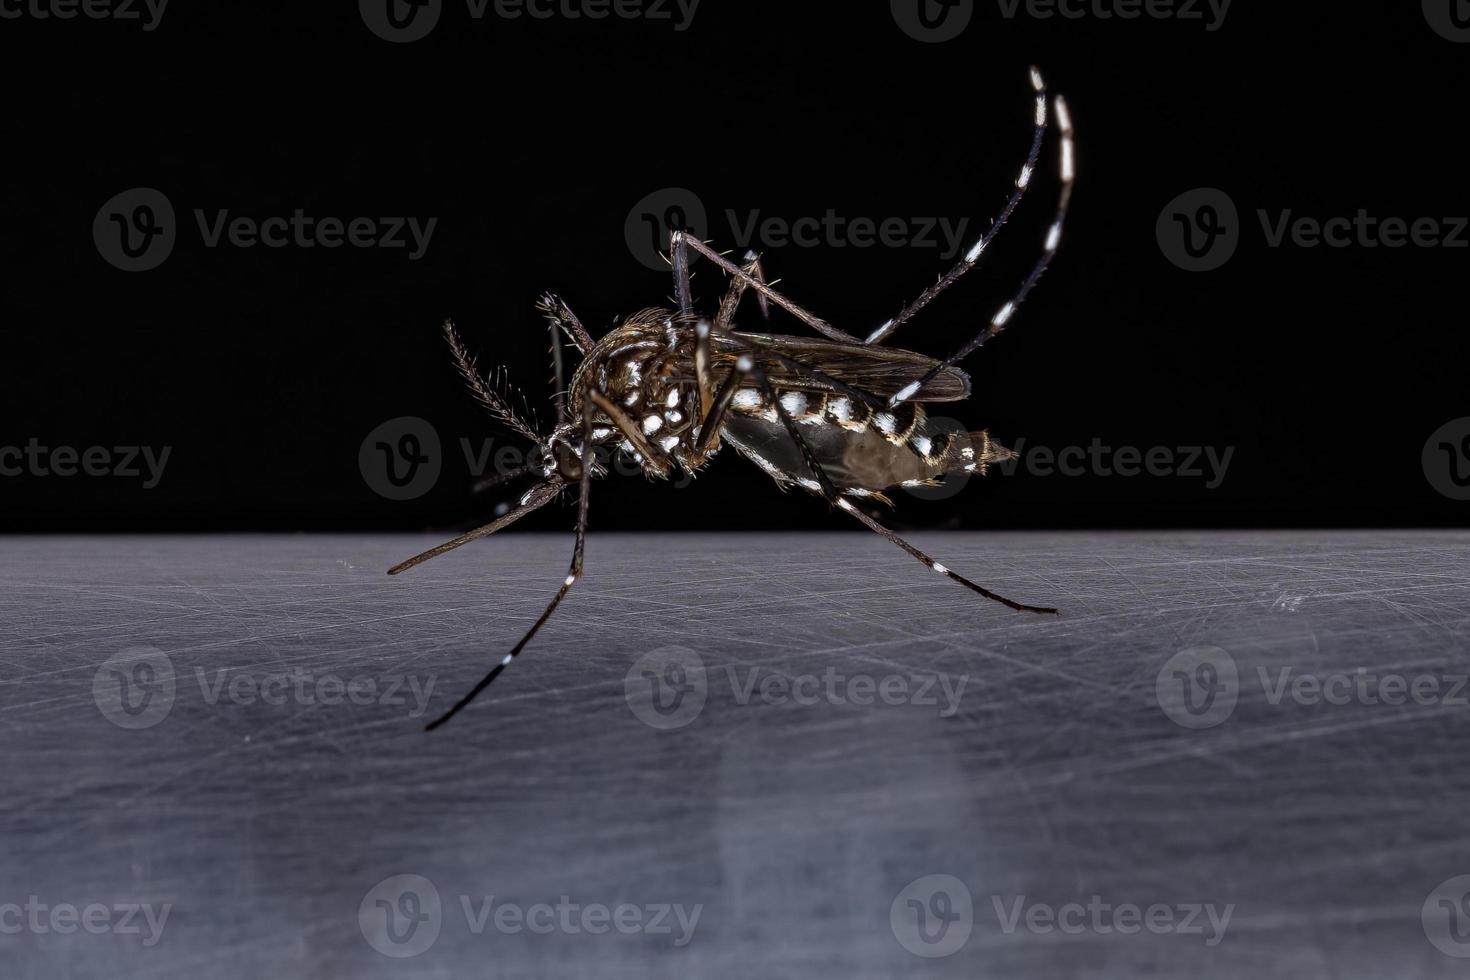 Adult Female Yellow Fever Mosquito photo